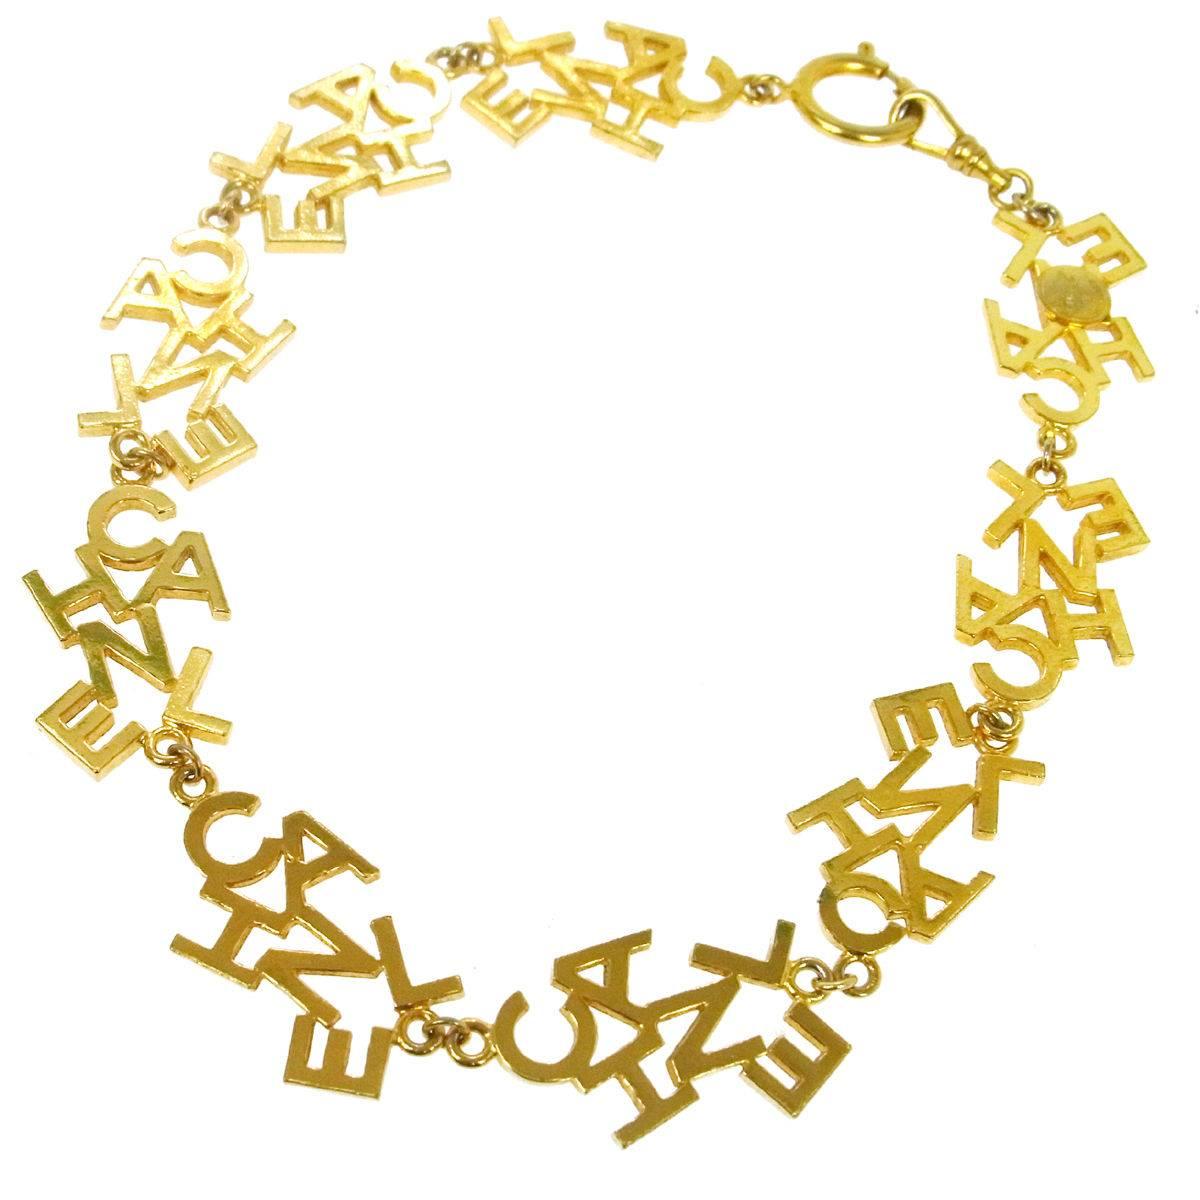 Chanel Vintage Gold 'CHANEL' Charm Letters Choker Necklace